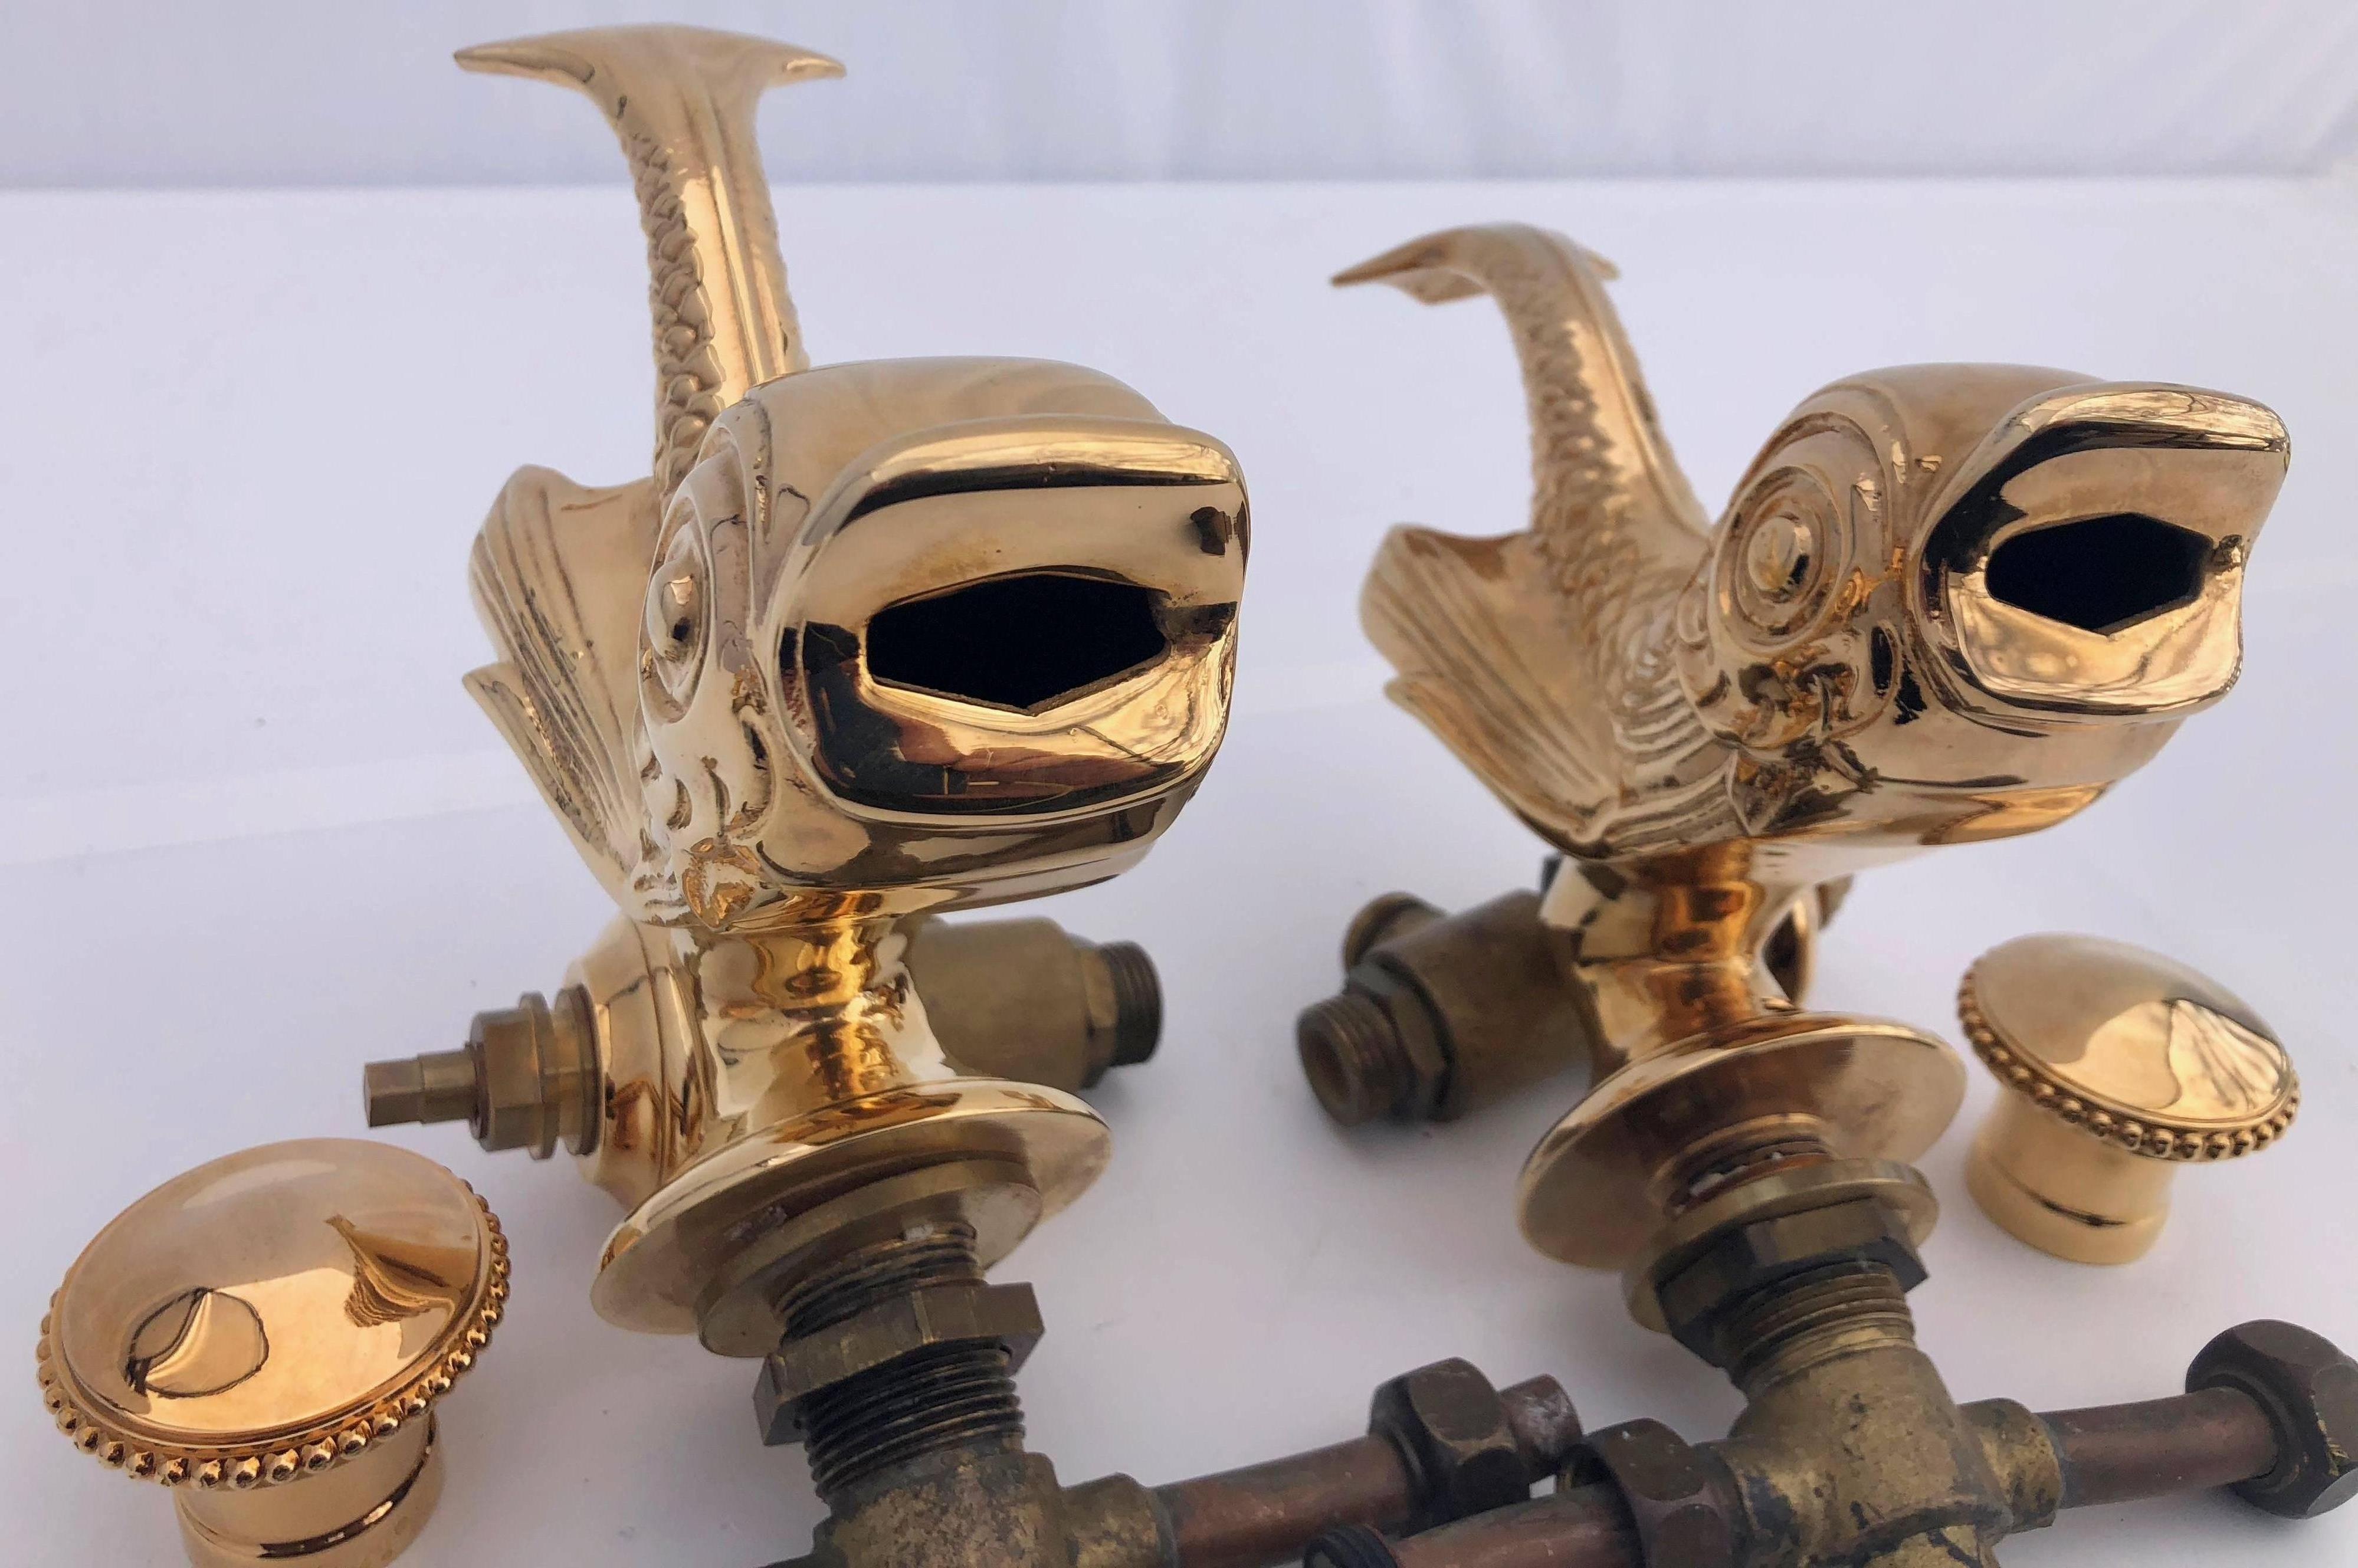 This gold-plated set of two faucets were custom-made for the opening of a famous Parisian restaurant in 1963 (La Marée rue Daru Paris 8). They were restored and plated with gold leaves in the 1980s and then never used. The dolphin figures are